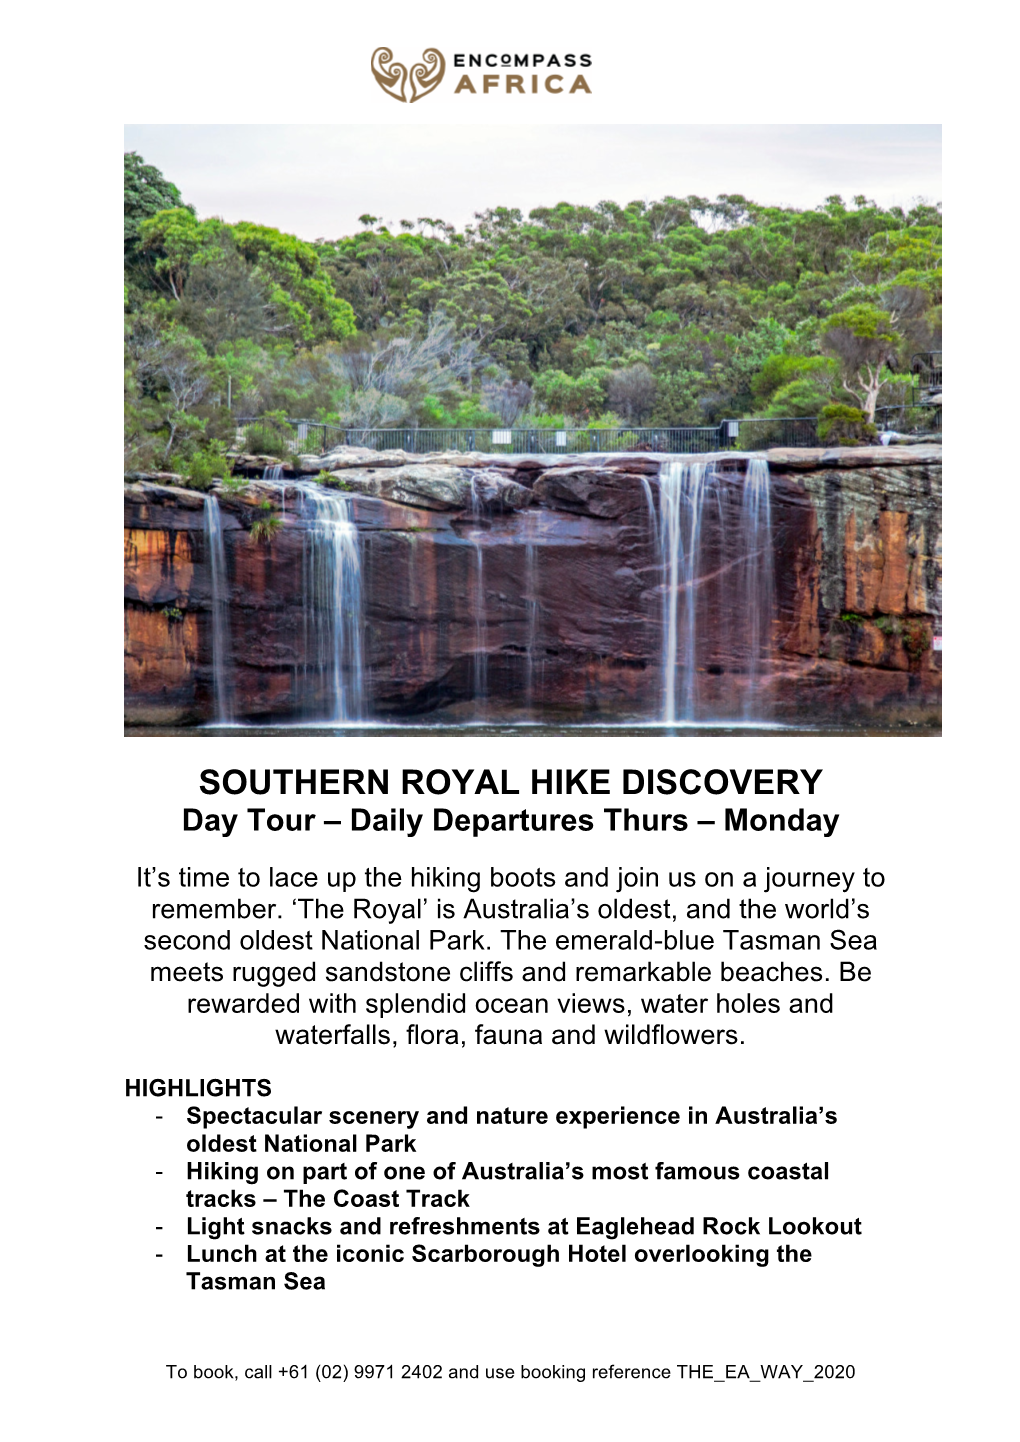 SOUTHERN ROYAL HIKE DISCOVERY Day Tour – Daily Departures Thurs – Monday